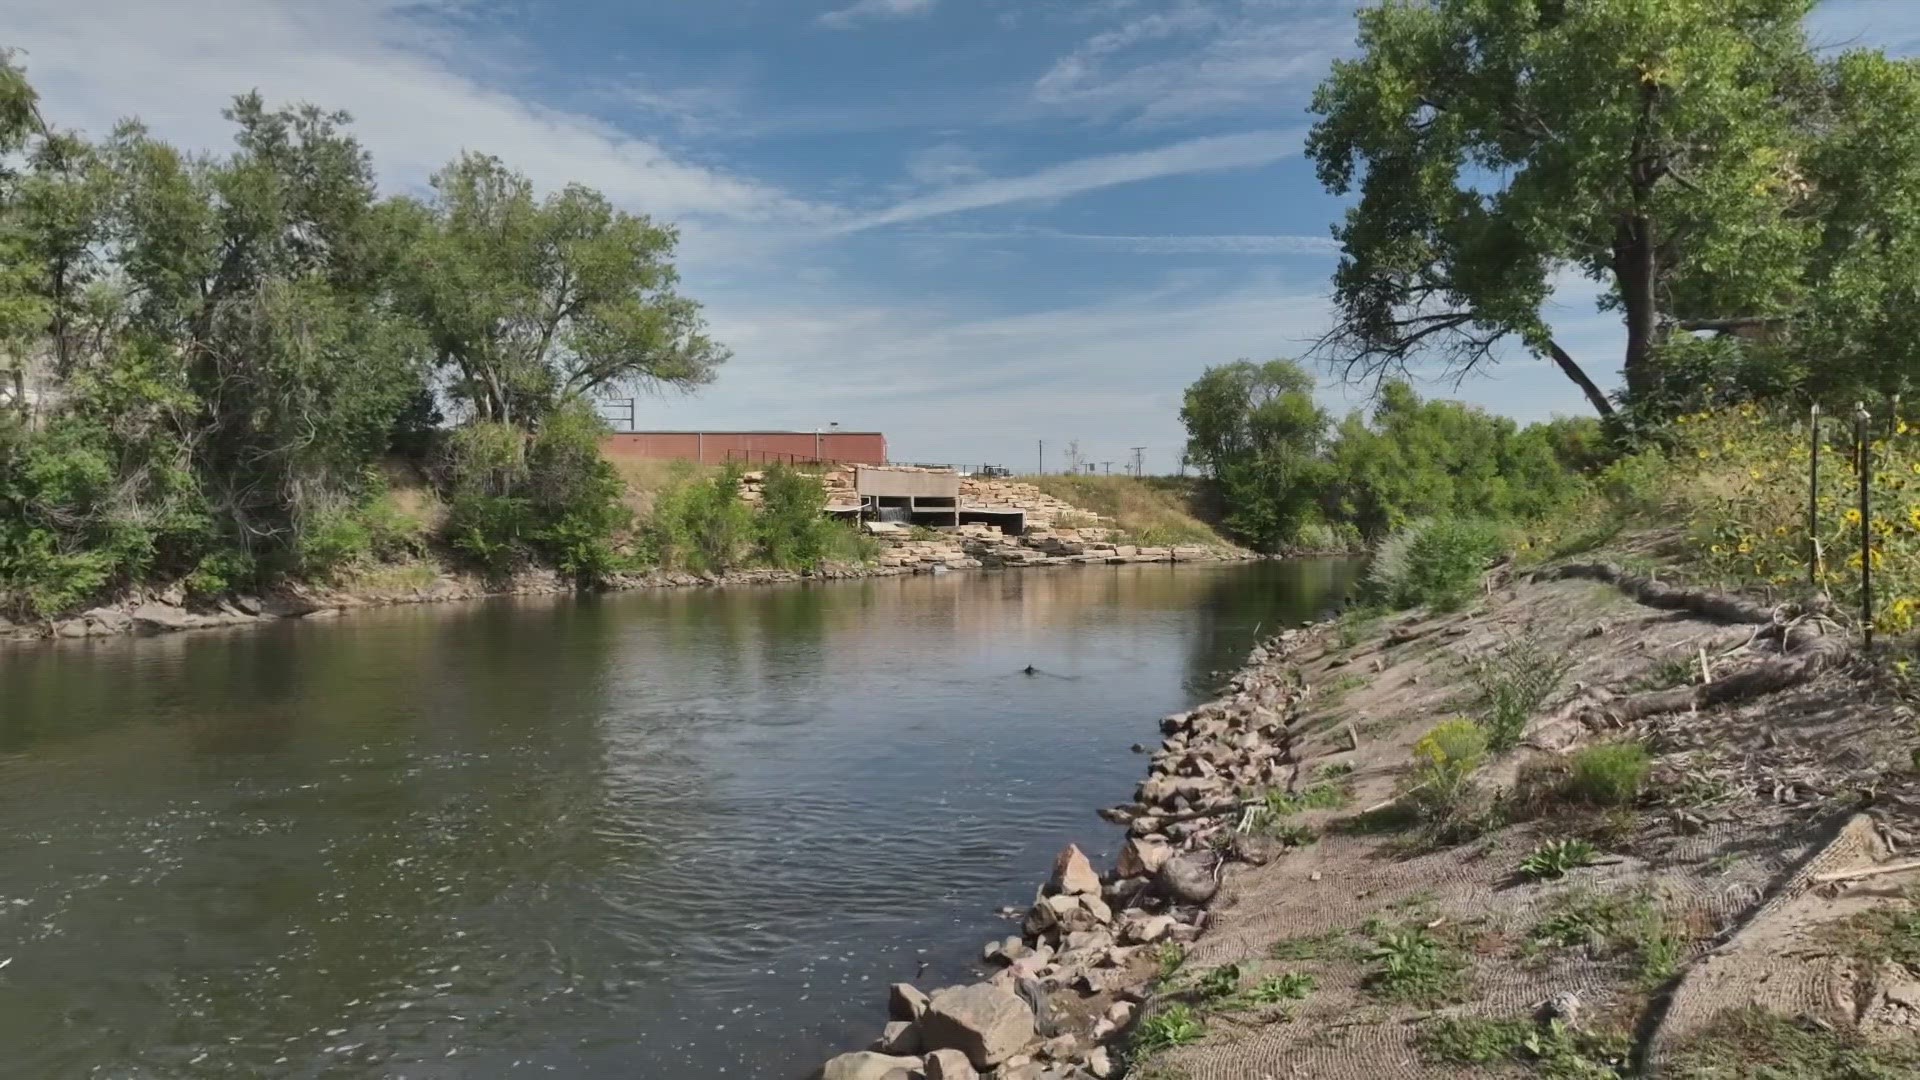 Lluvia Robles-Banuelos and Jeremy Hutcheson were shot and killed in separate incidents near the South Platte River bike path earlier this month.